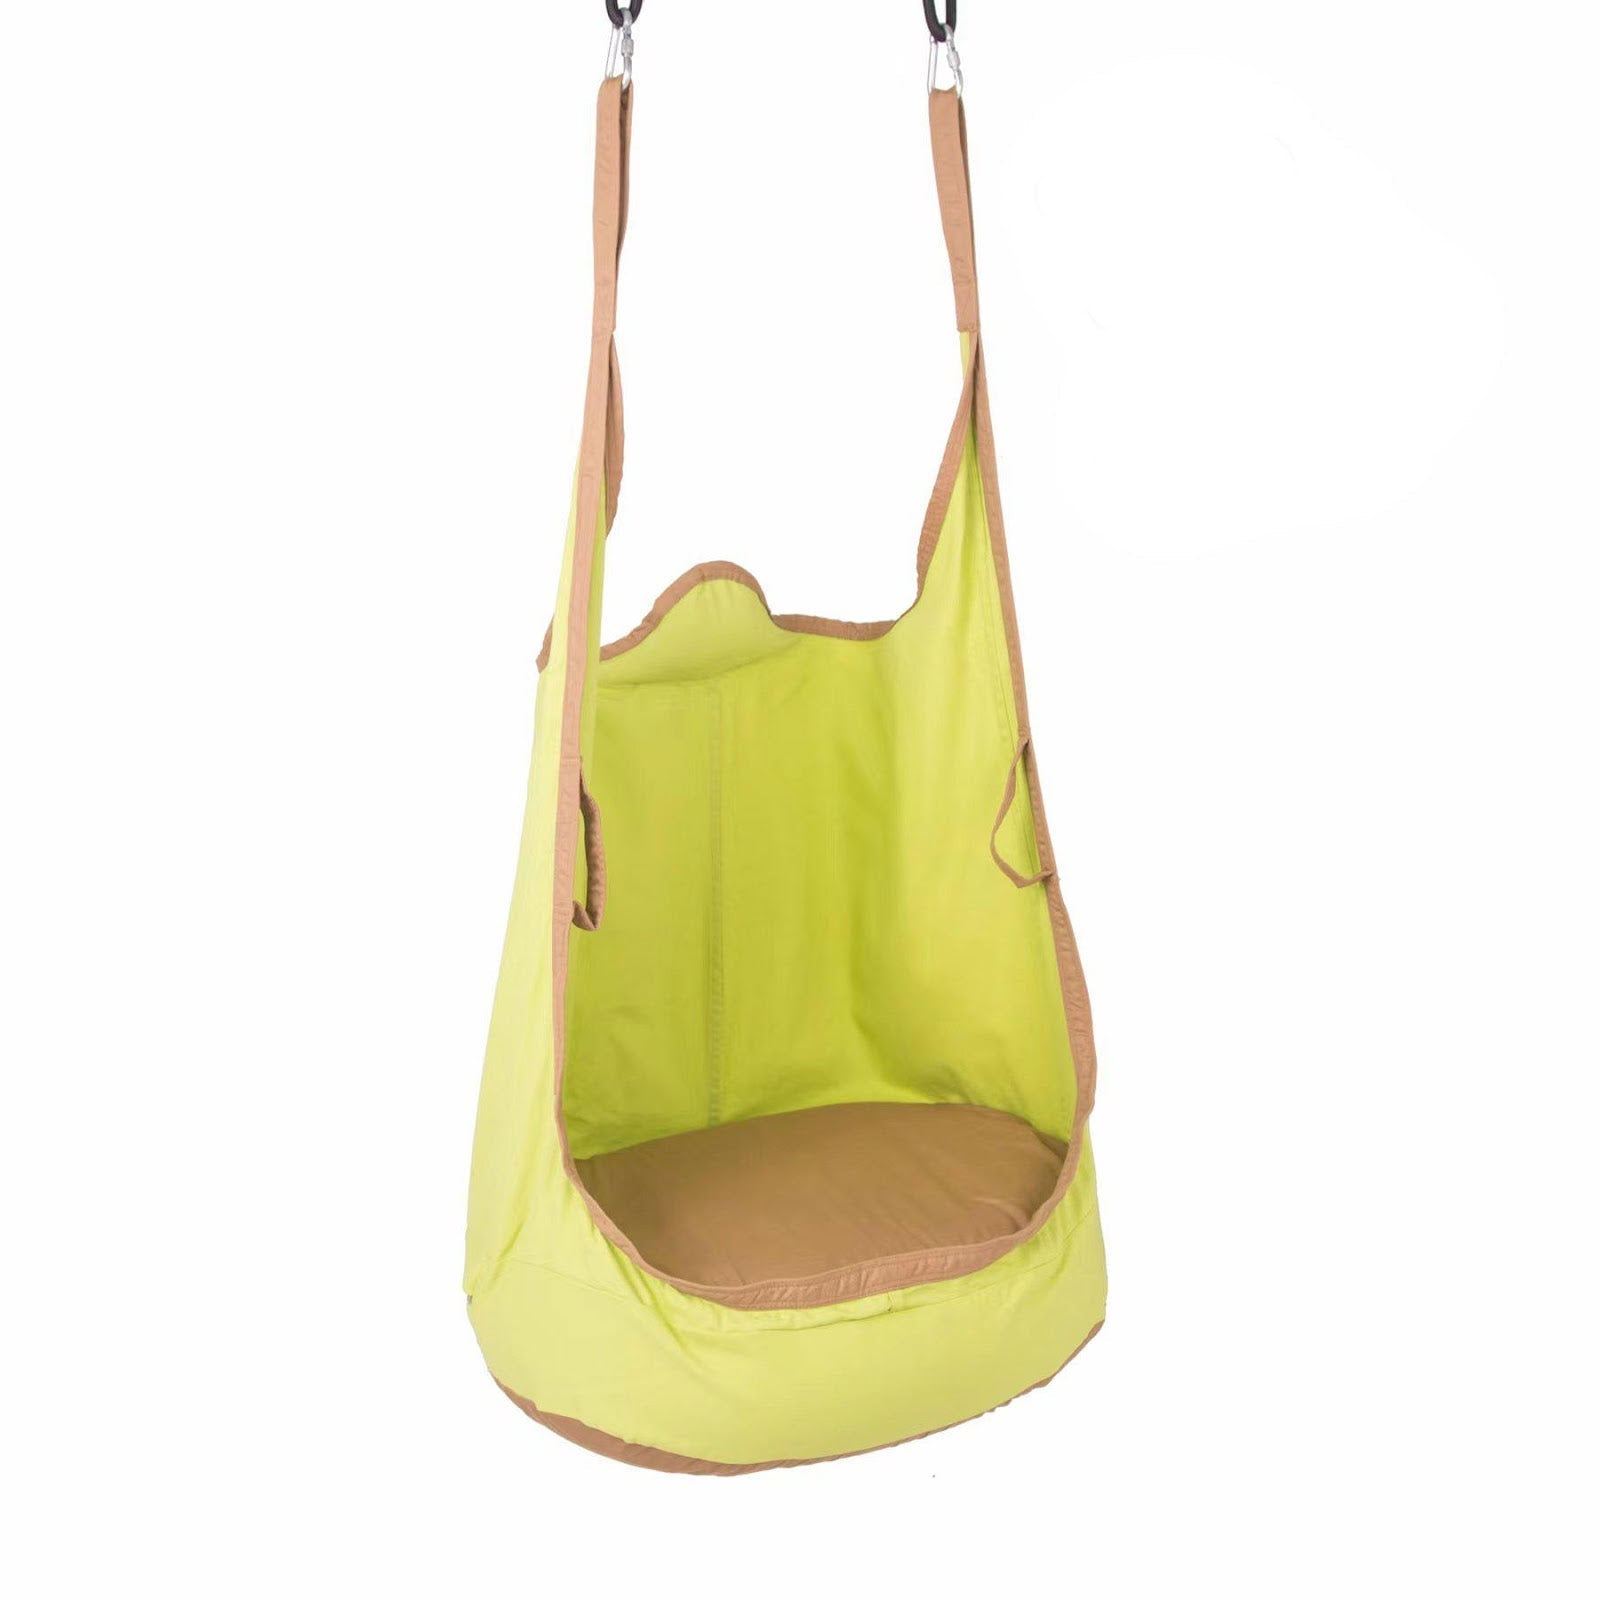 Sensory Swing Attachment for our Large Climbers - Climbers Not Included